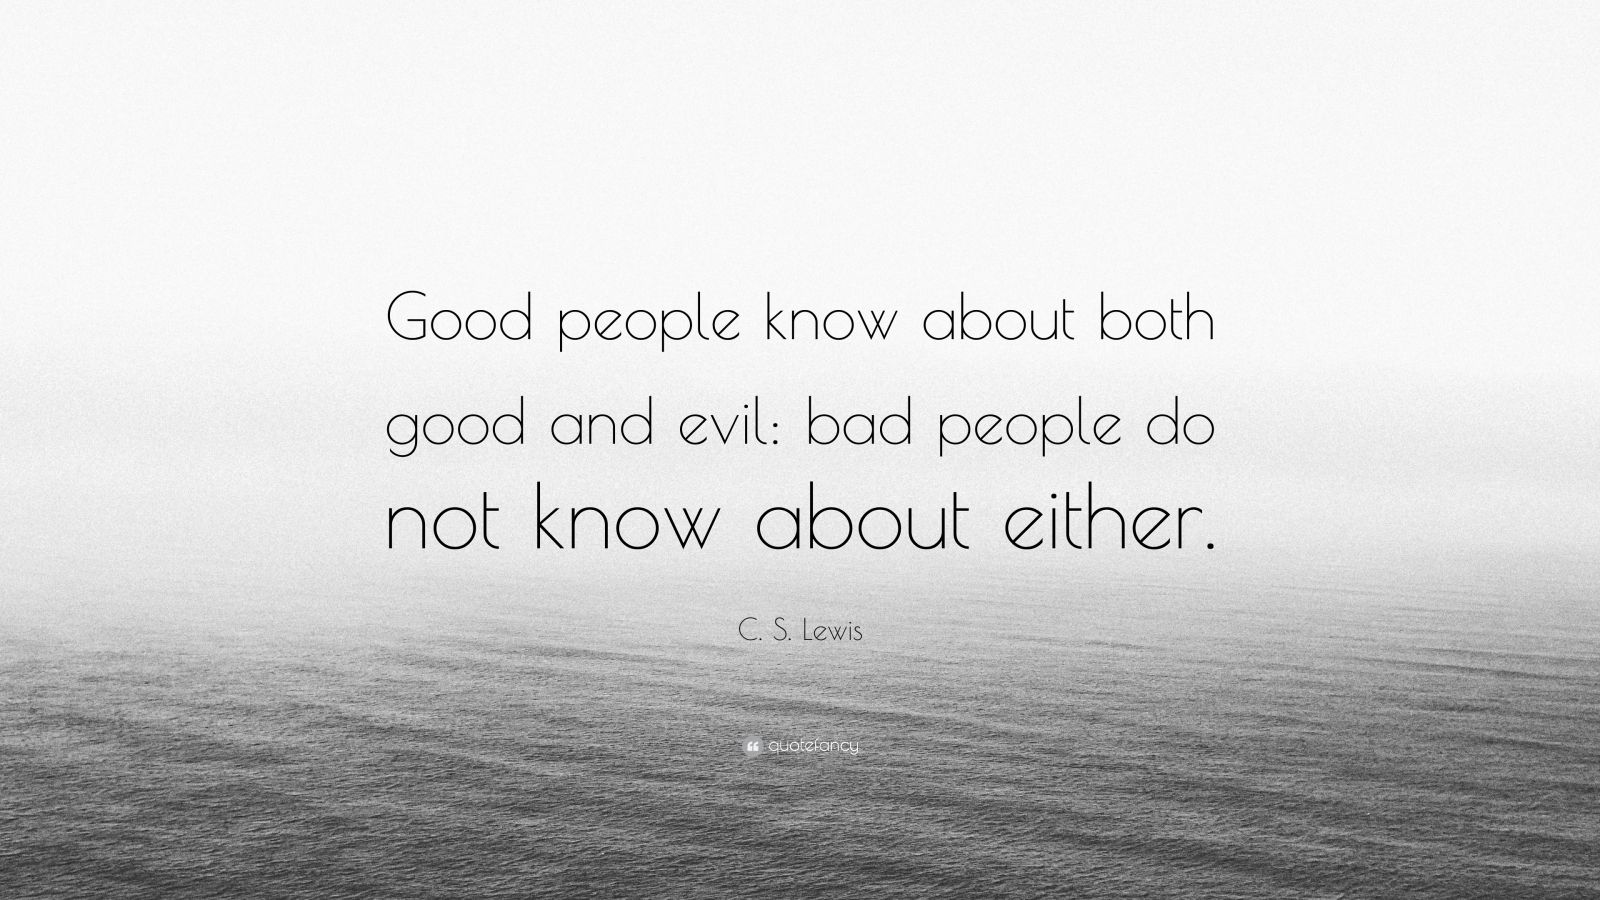 C. S. Lewis Quote: “Good people know about both good and evil: bad